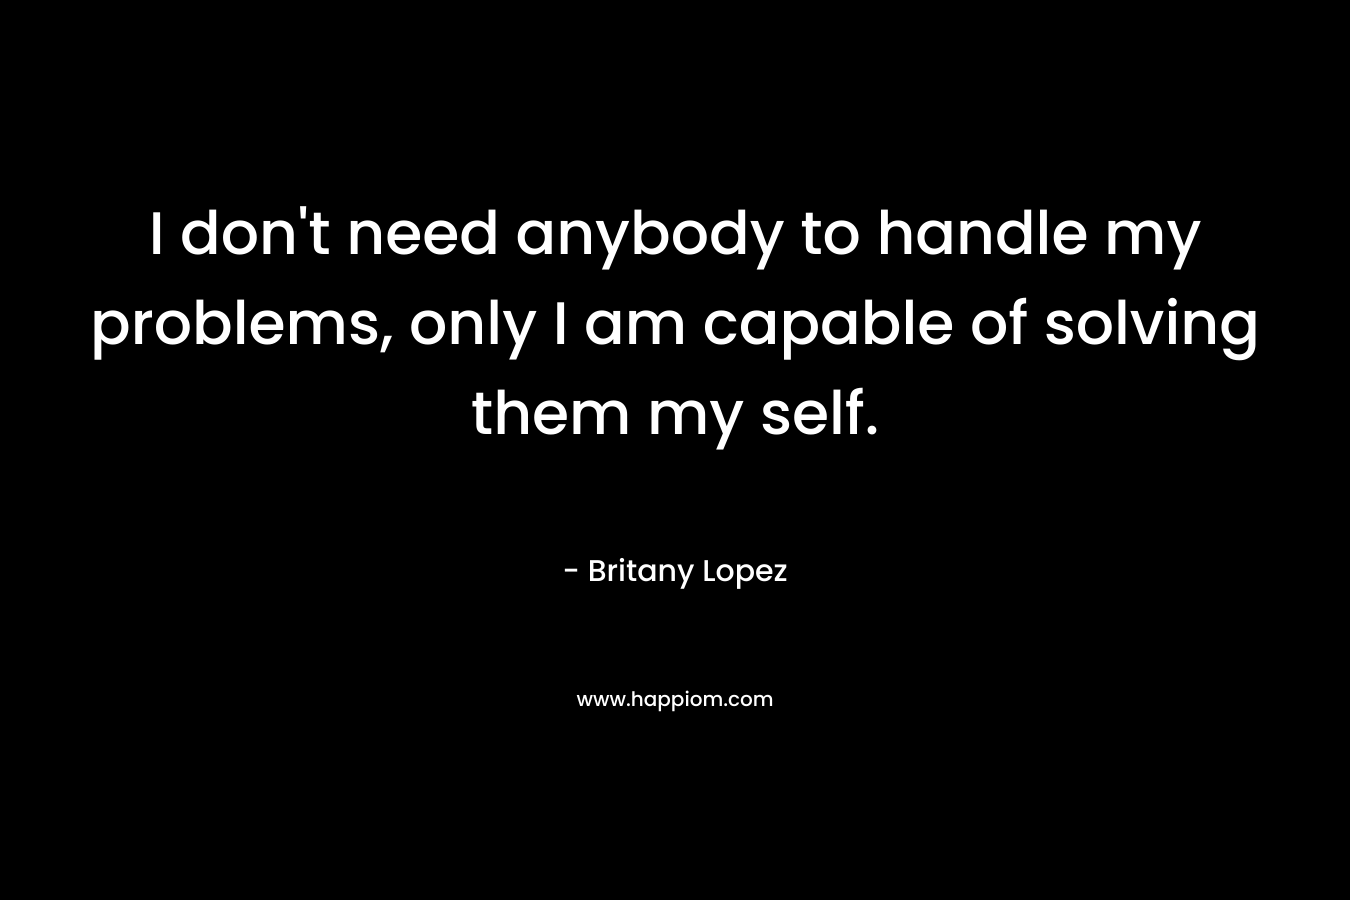 I don’t need anybody to handle my problems, only I am capable of solving them my self. – Britany Lopez